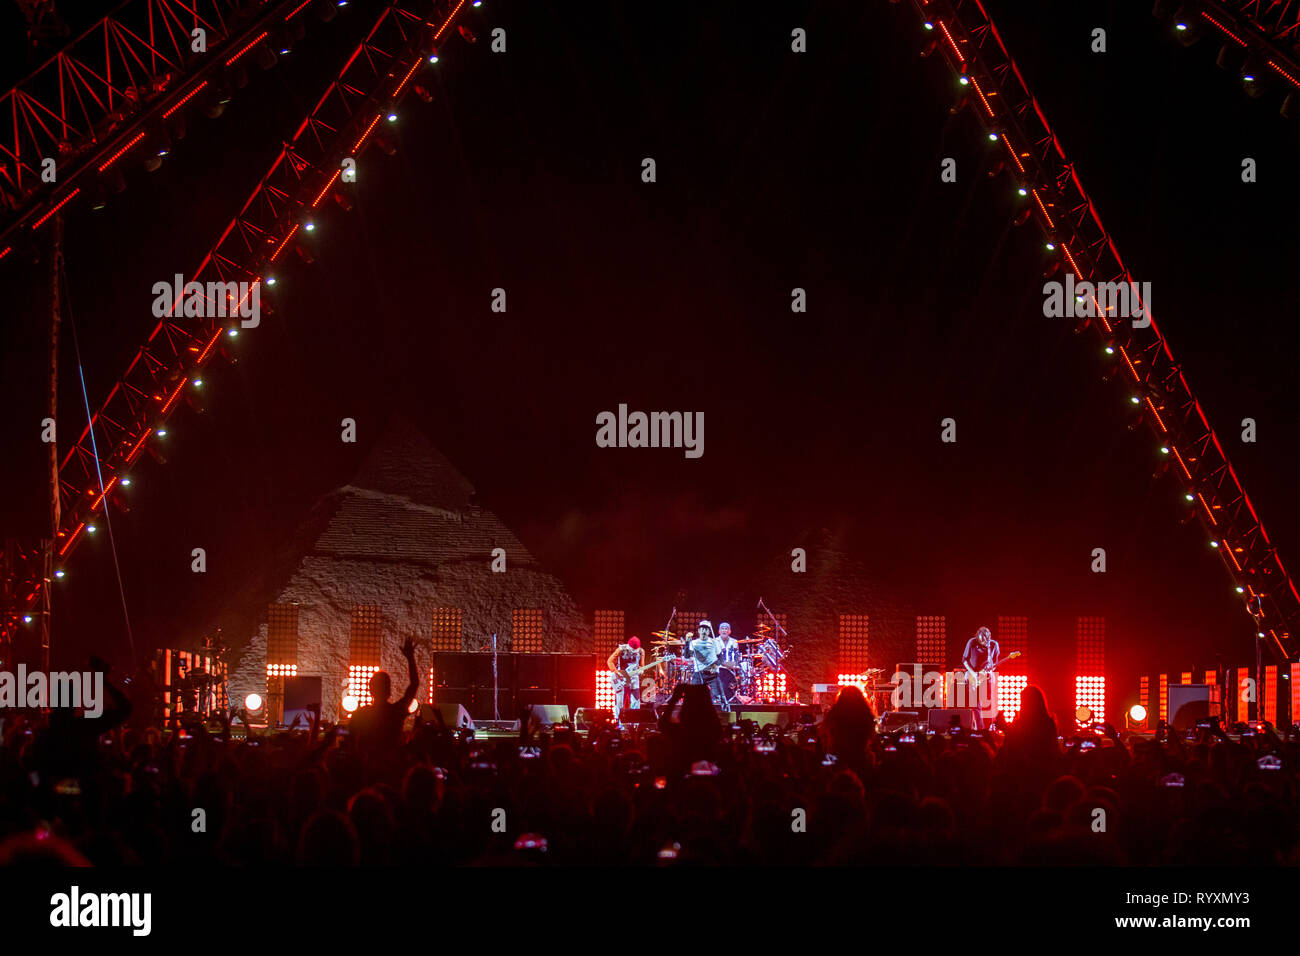 krabbe Officer kalender Cairo, Egypt. 15th Mar, 2019. The US band the Red Hot Chili Peppers  performs at the Giza Pyramids outside Cairo. Credit: Gehad Hamdy/dpa/Alamy  Live News Stock Photo - Alamy